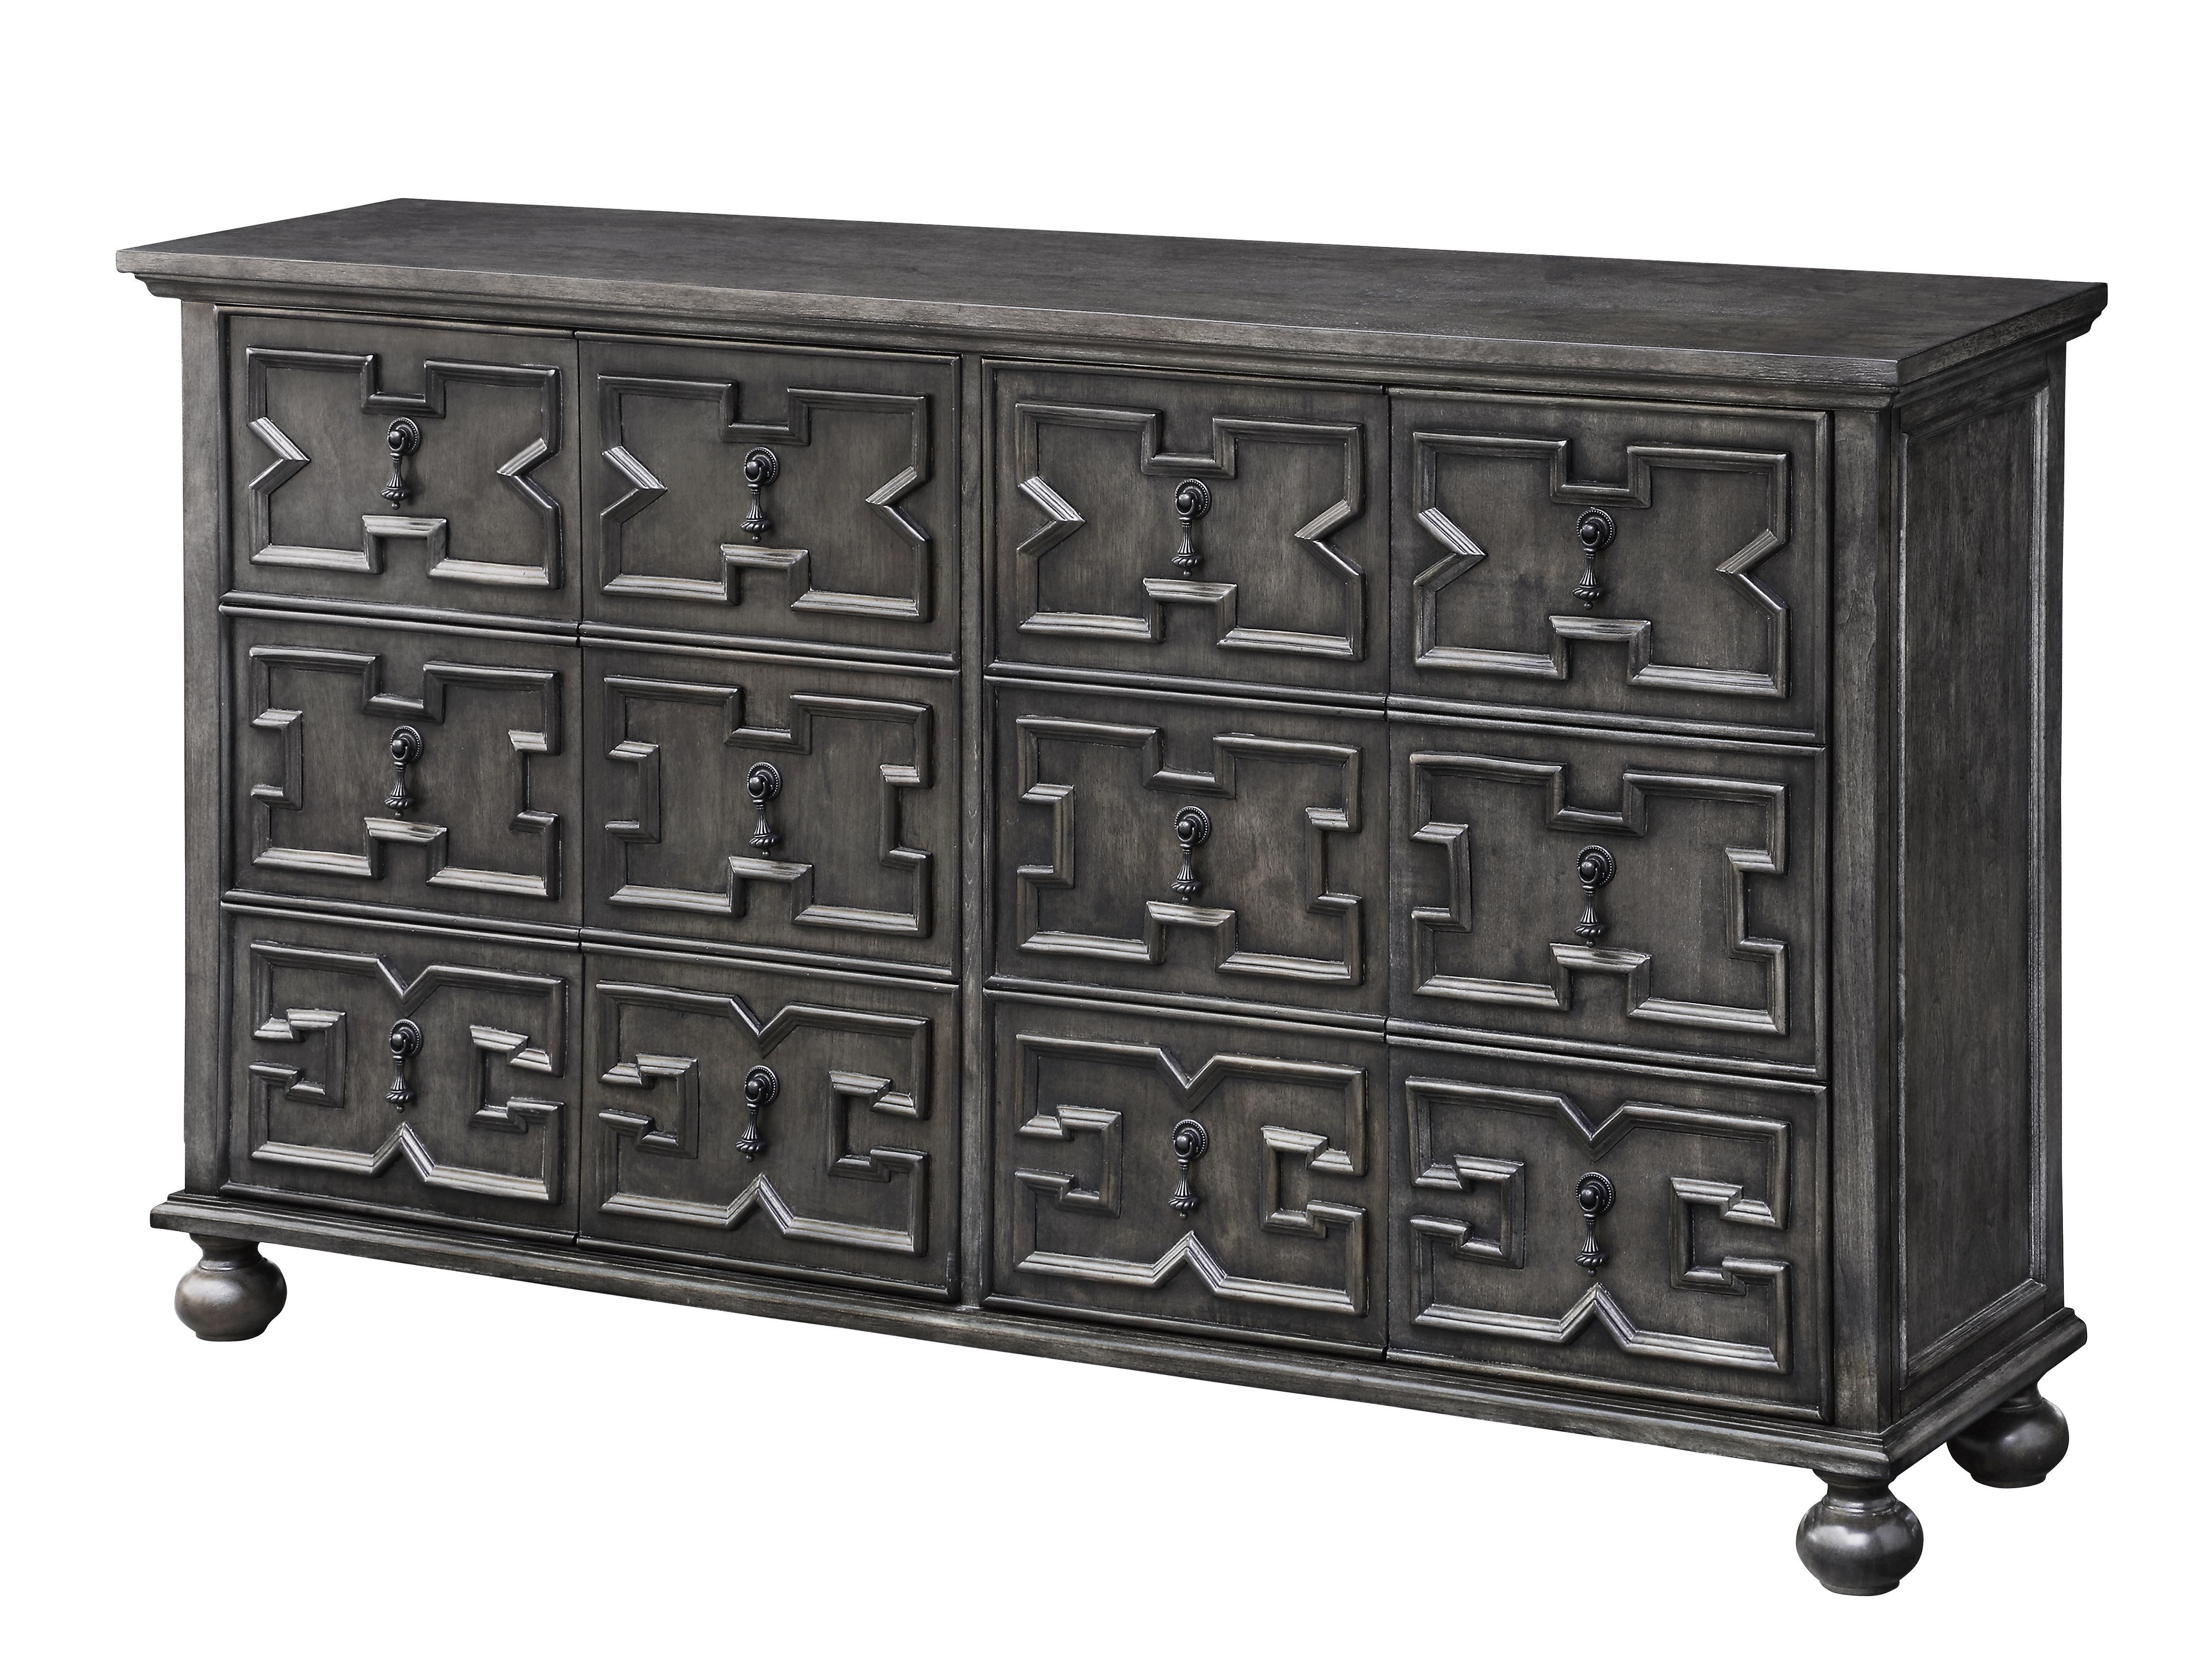 Rutledge Antique Grey 4 Door Pattern Front Sideboard Within Rutledge Sideboards (View 3 of 30)